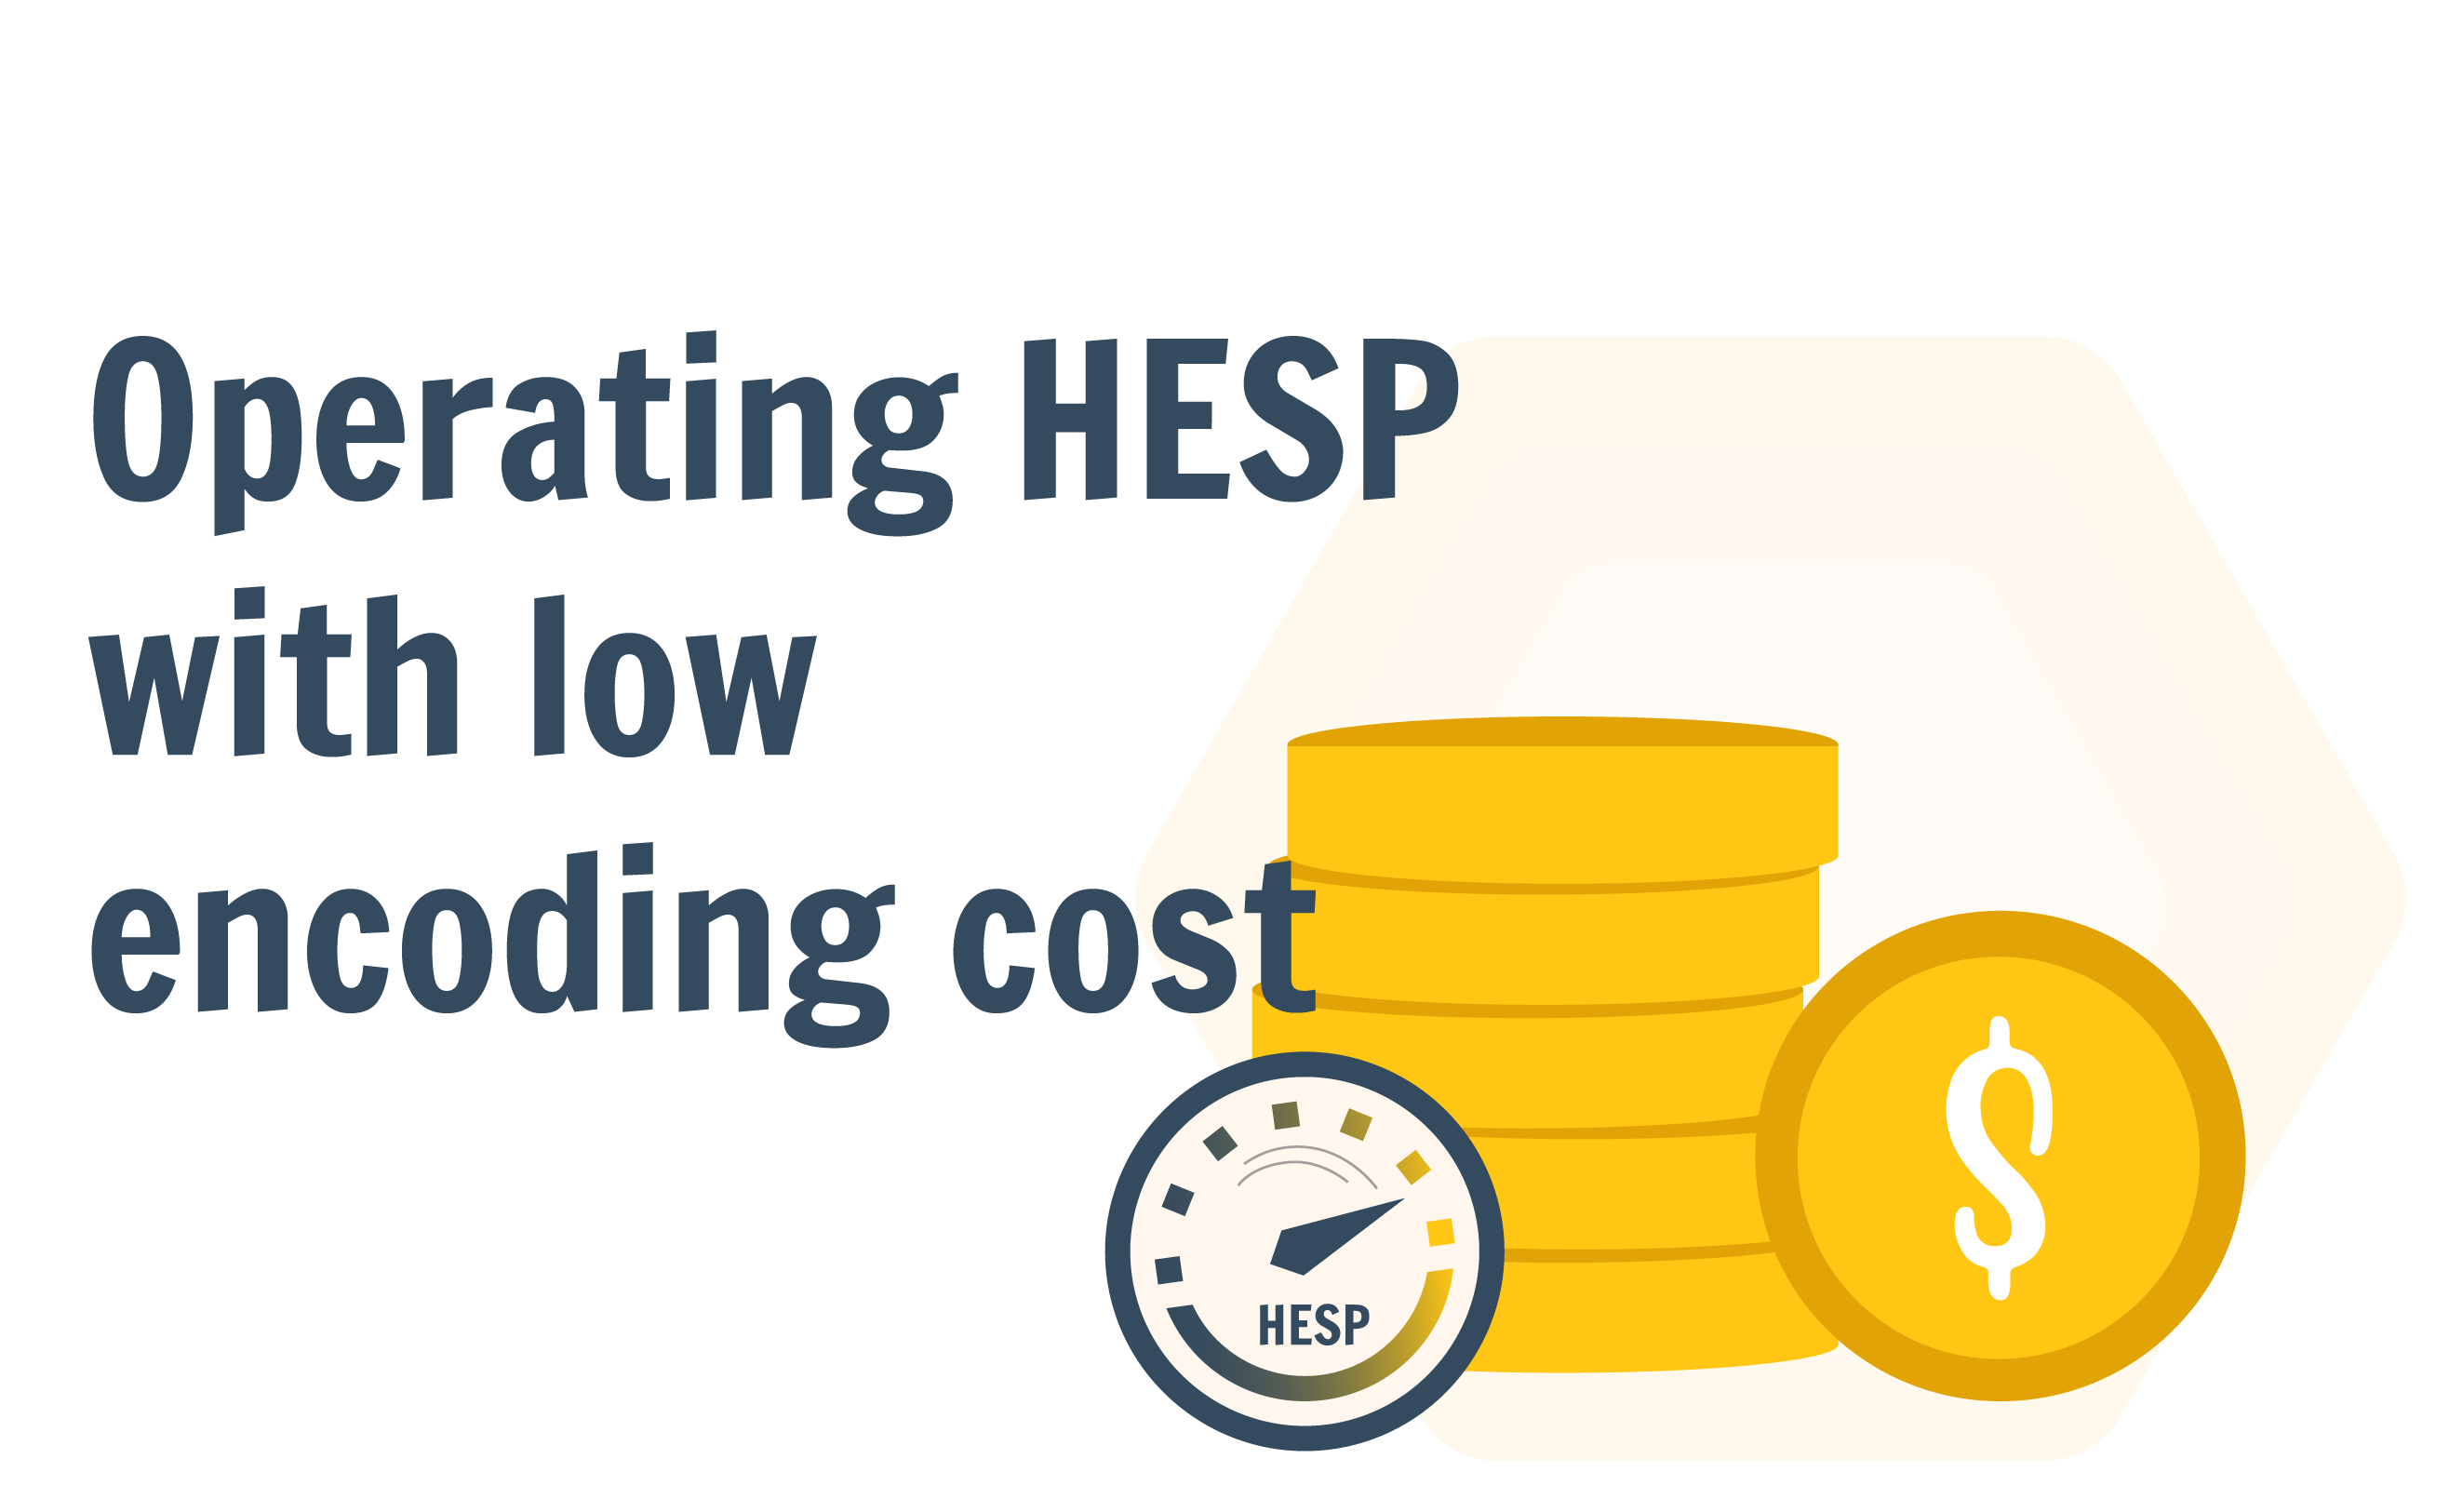 Operating HESP with low encoding costs